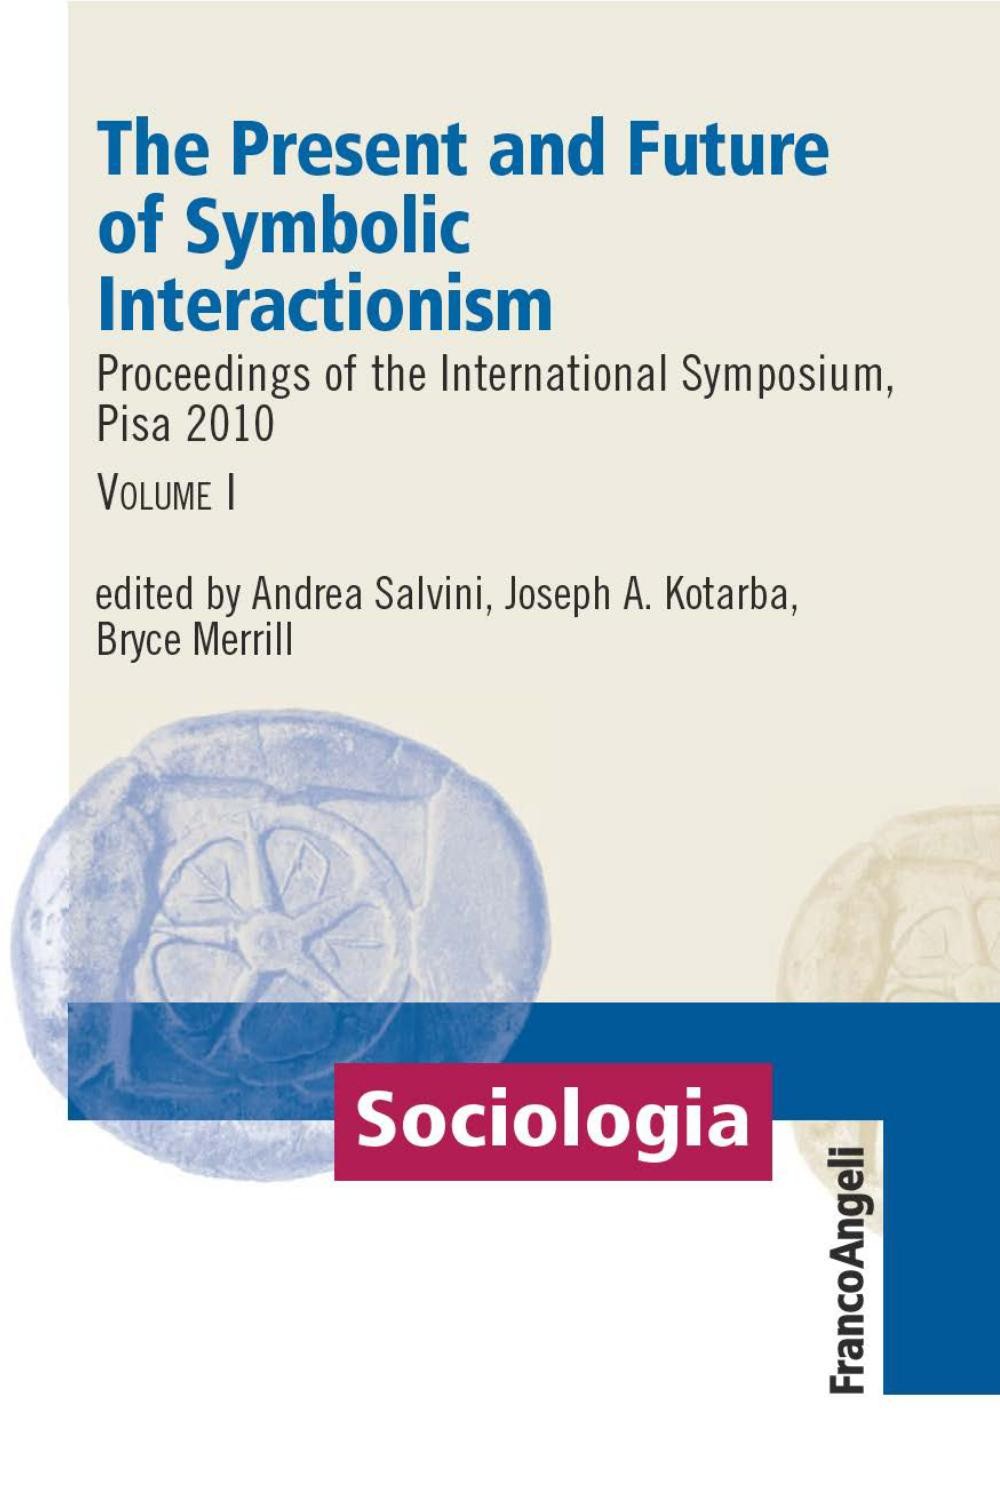 The Present and Future of Symbolic Interactionism. Vol. I. Proceedings of the International Symposium, Pisa 2010 - Librerie.coop